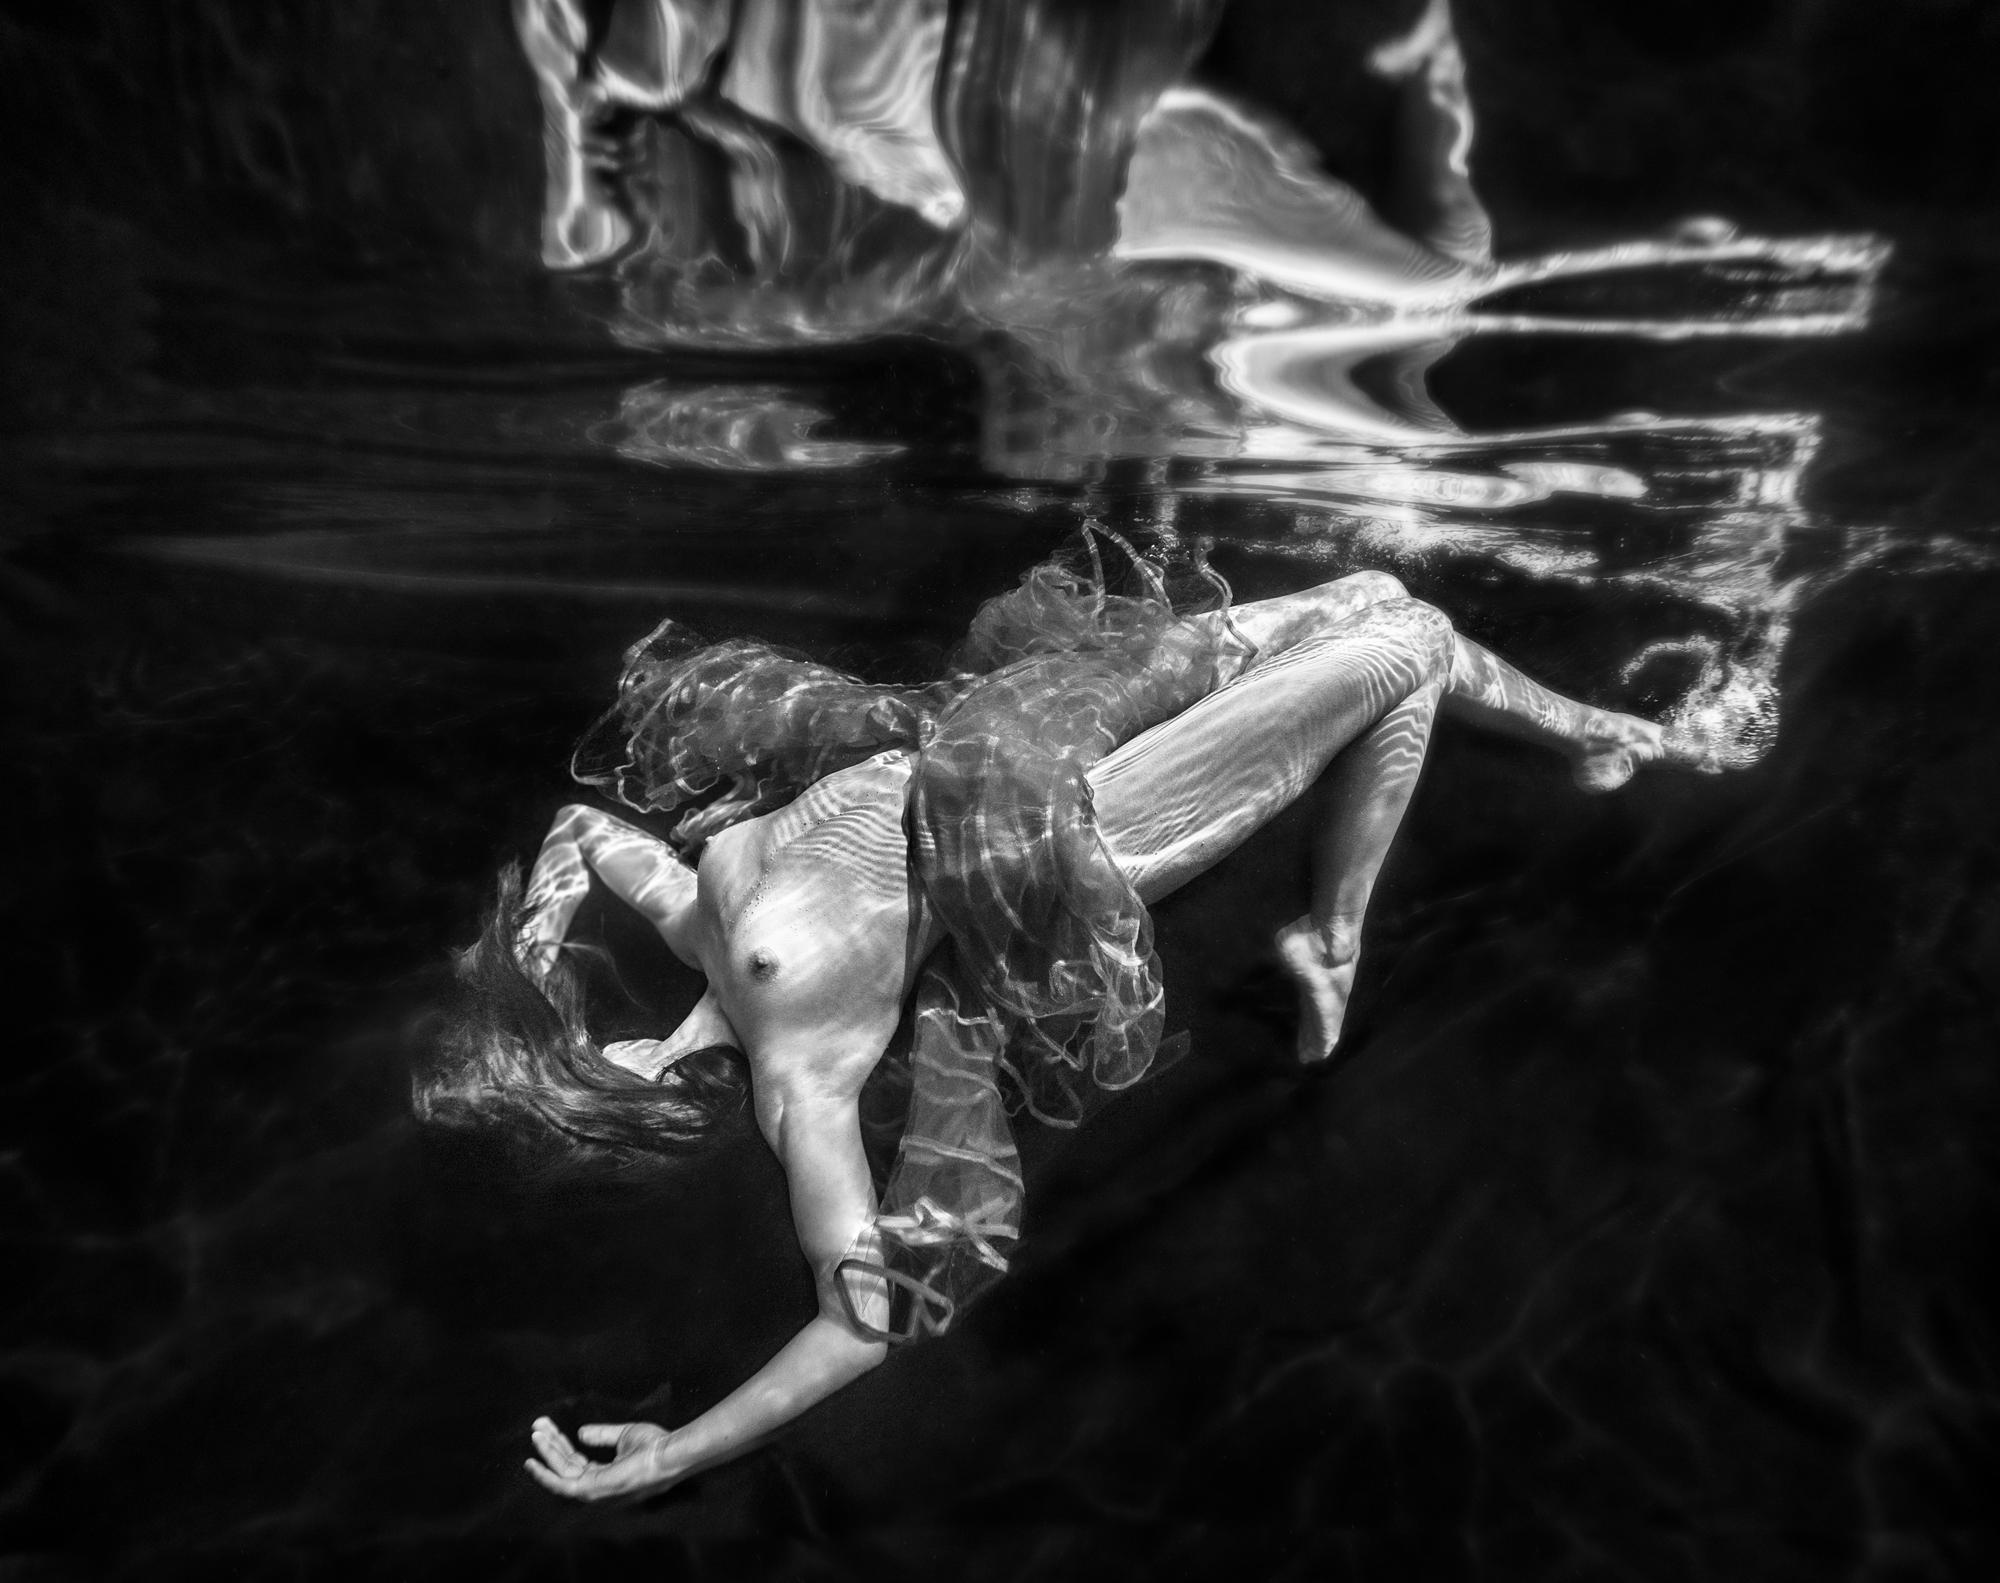 Alex Sher Nude Photograph - Infinity - underwater black and white nude photograph - archival paper 17"x22"